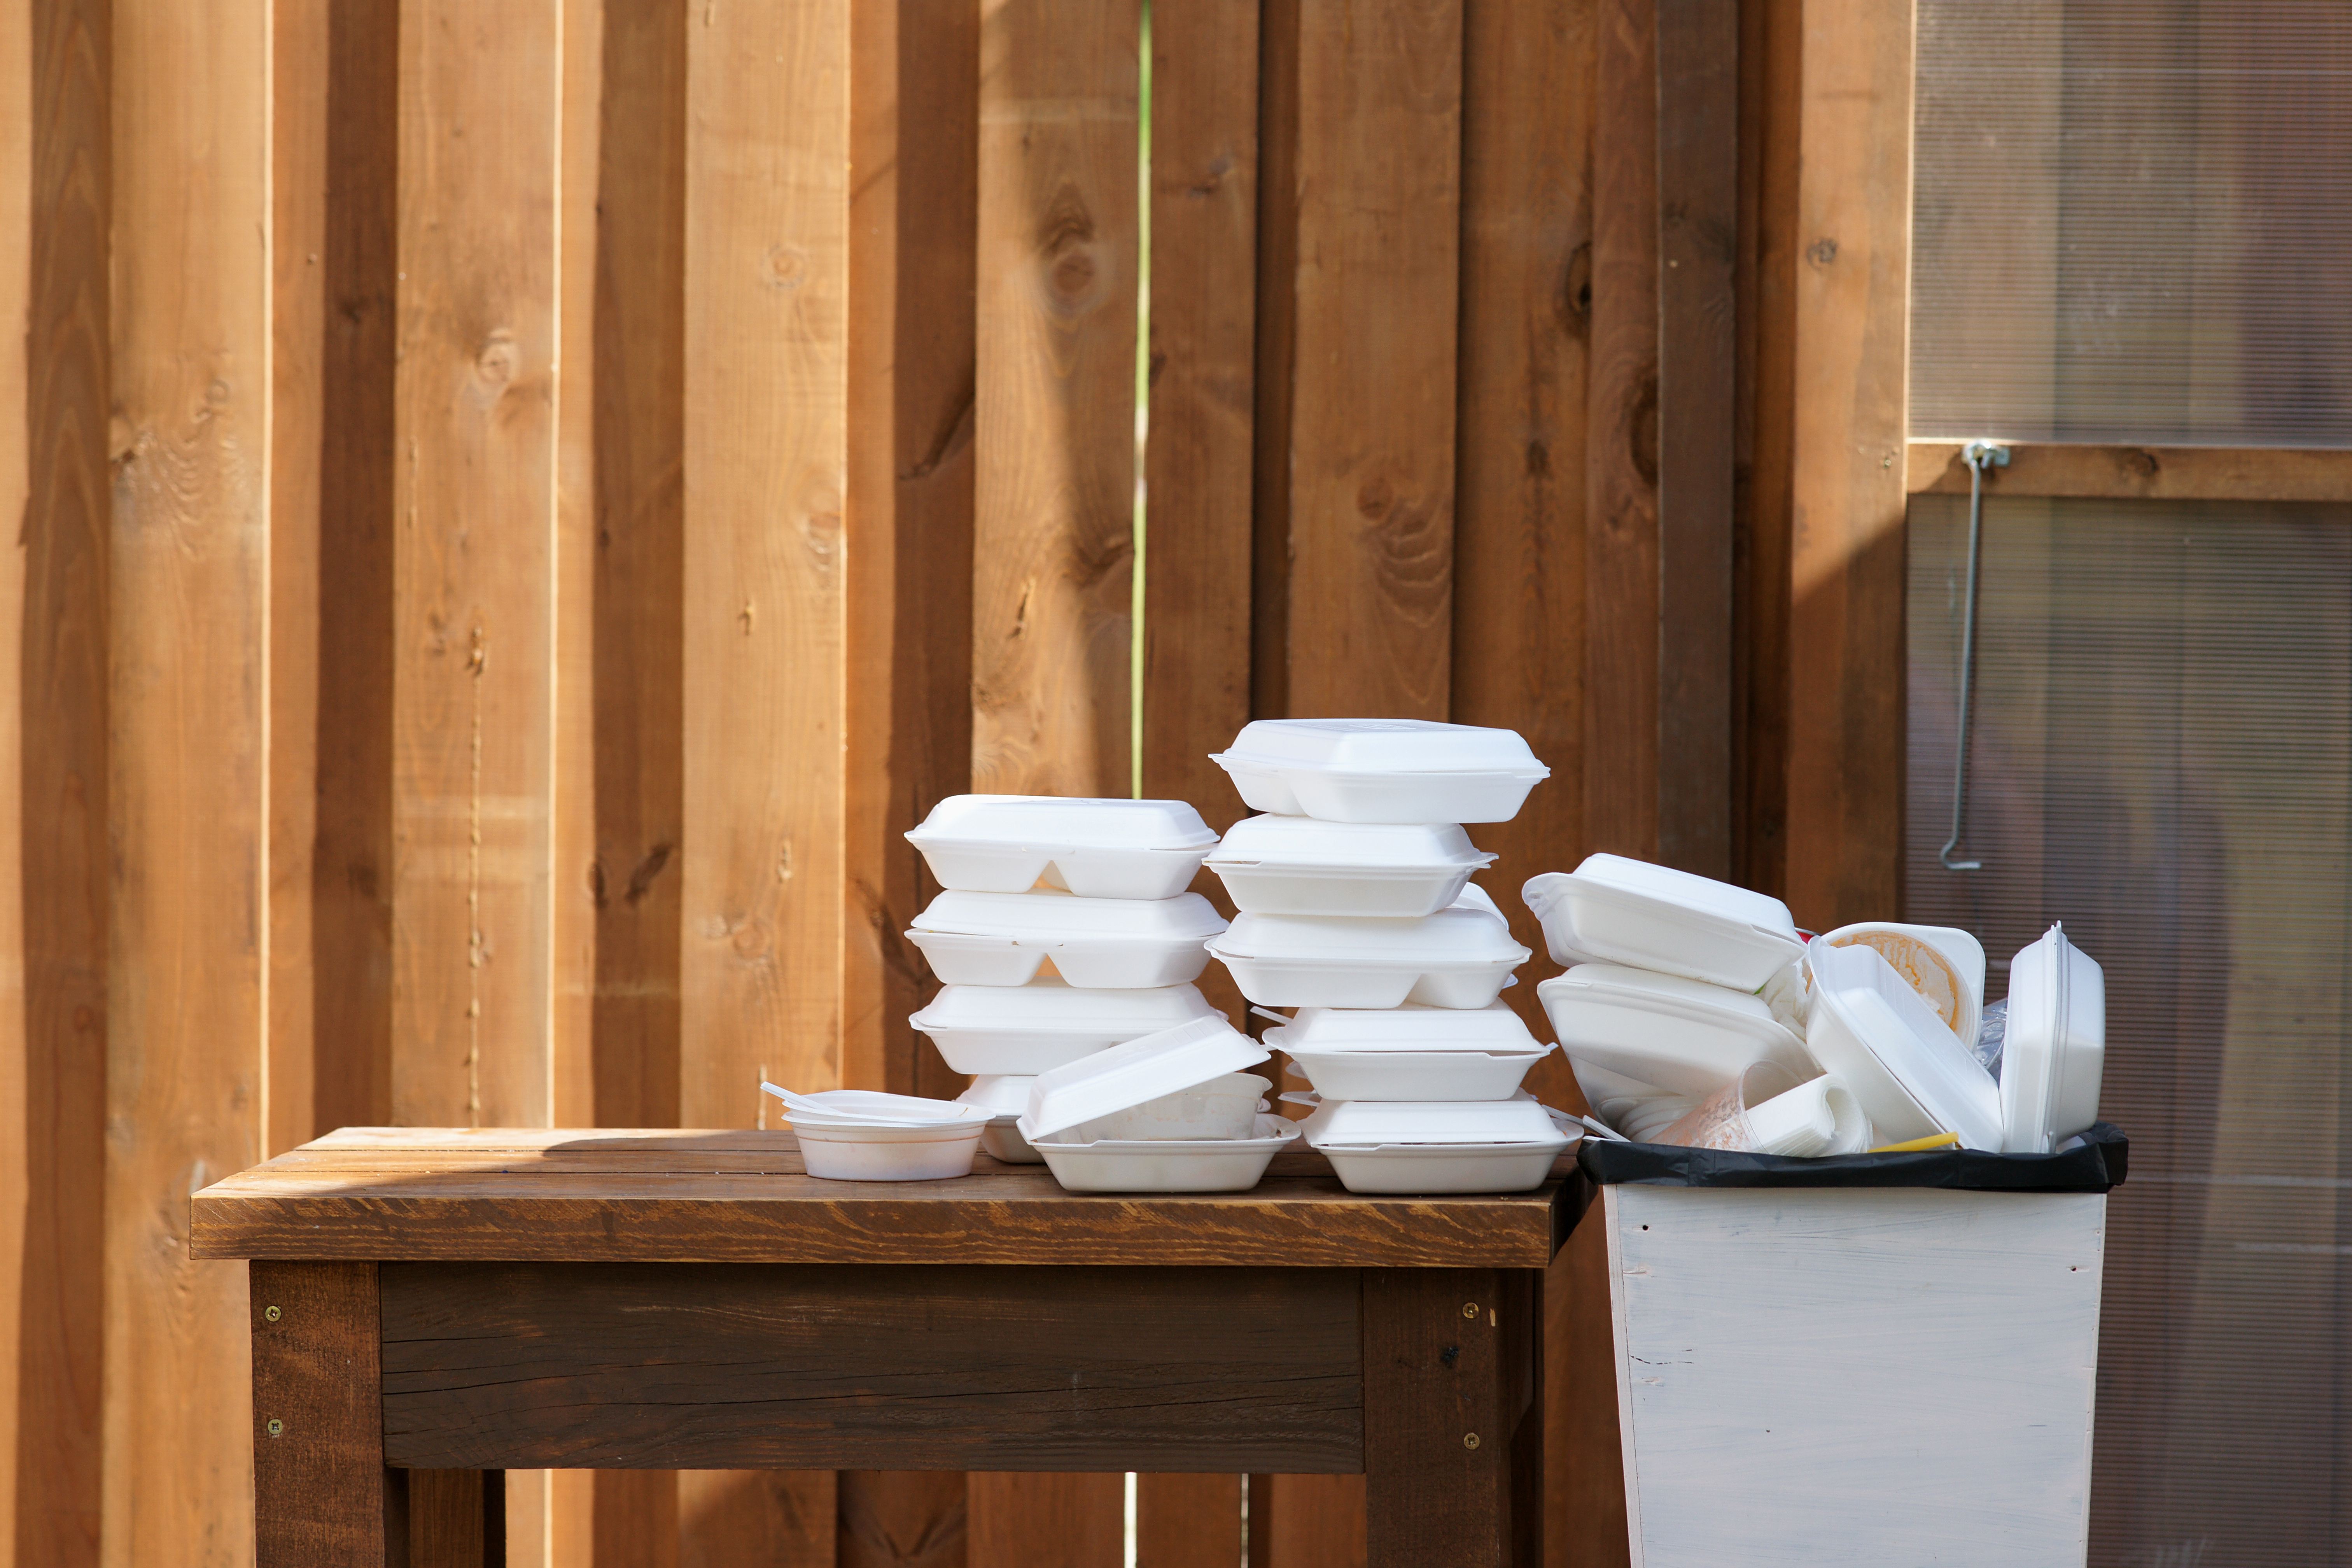 Polystyrene food containers